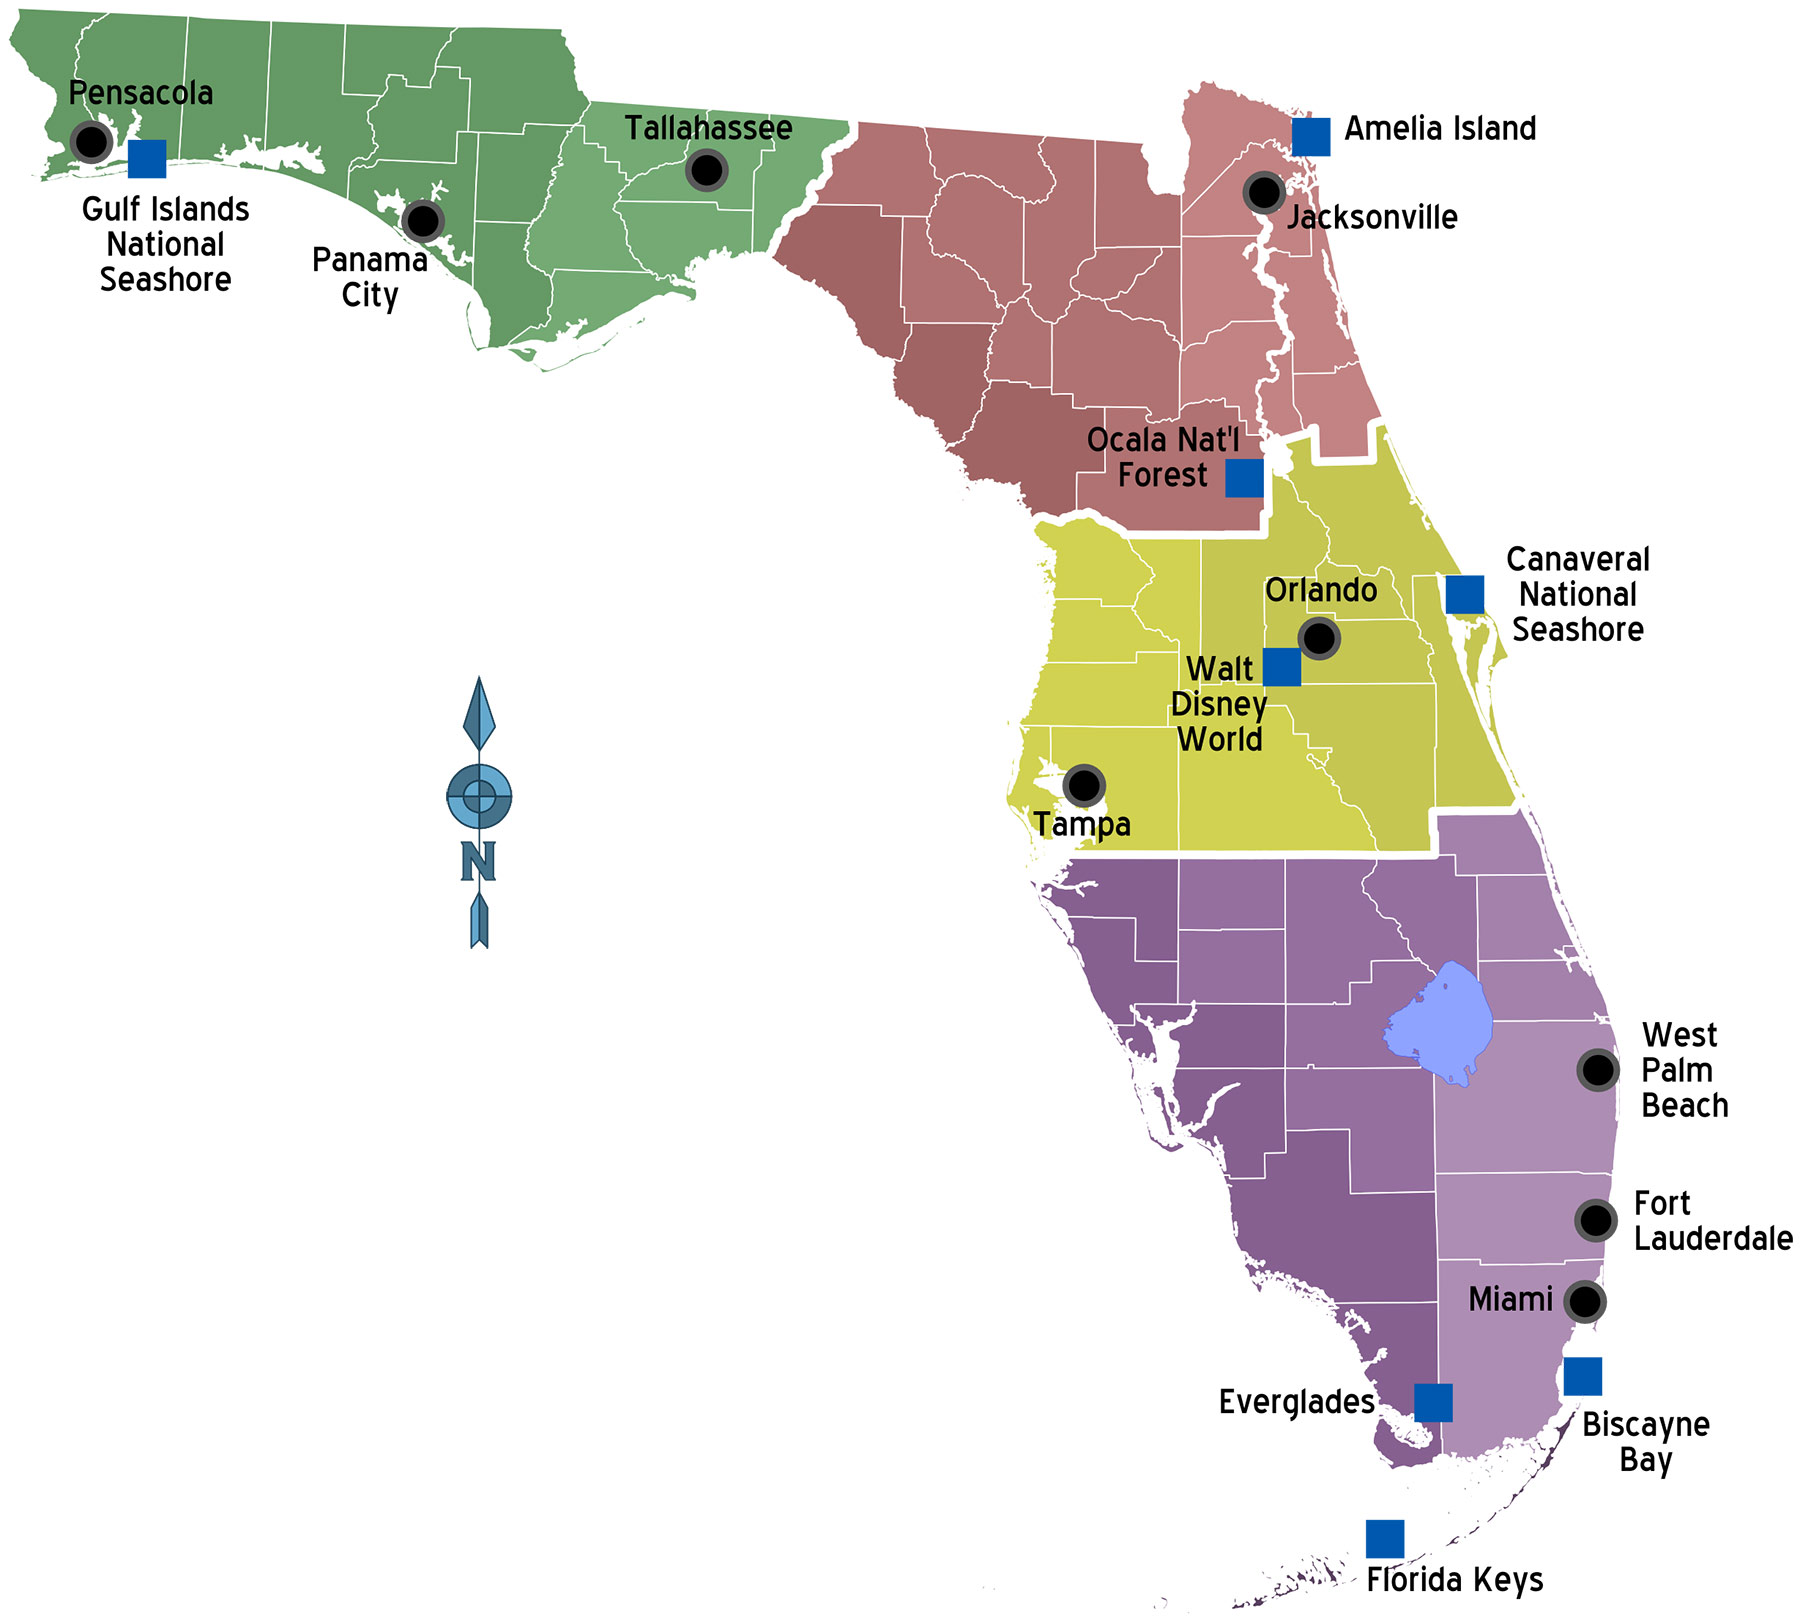 Florida's Regions and Cities